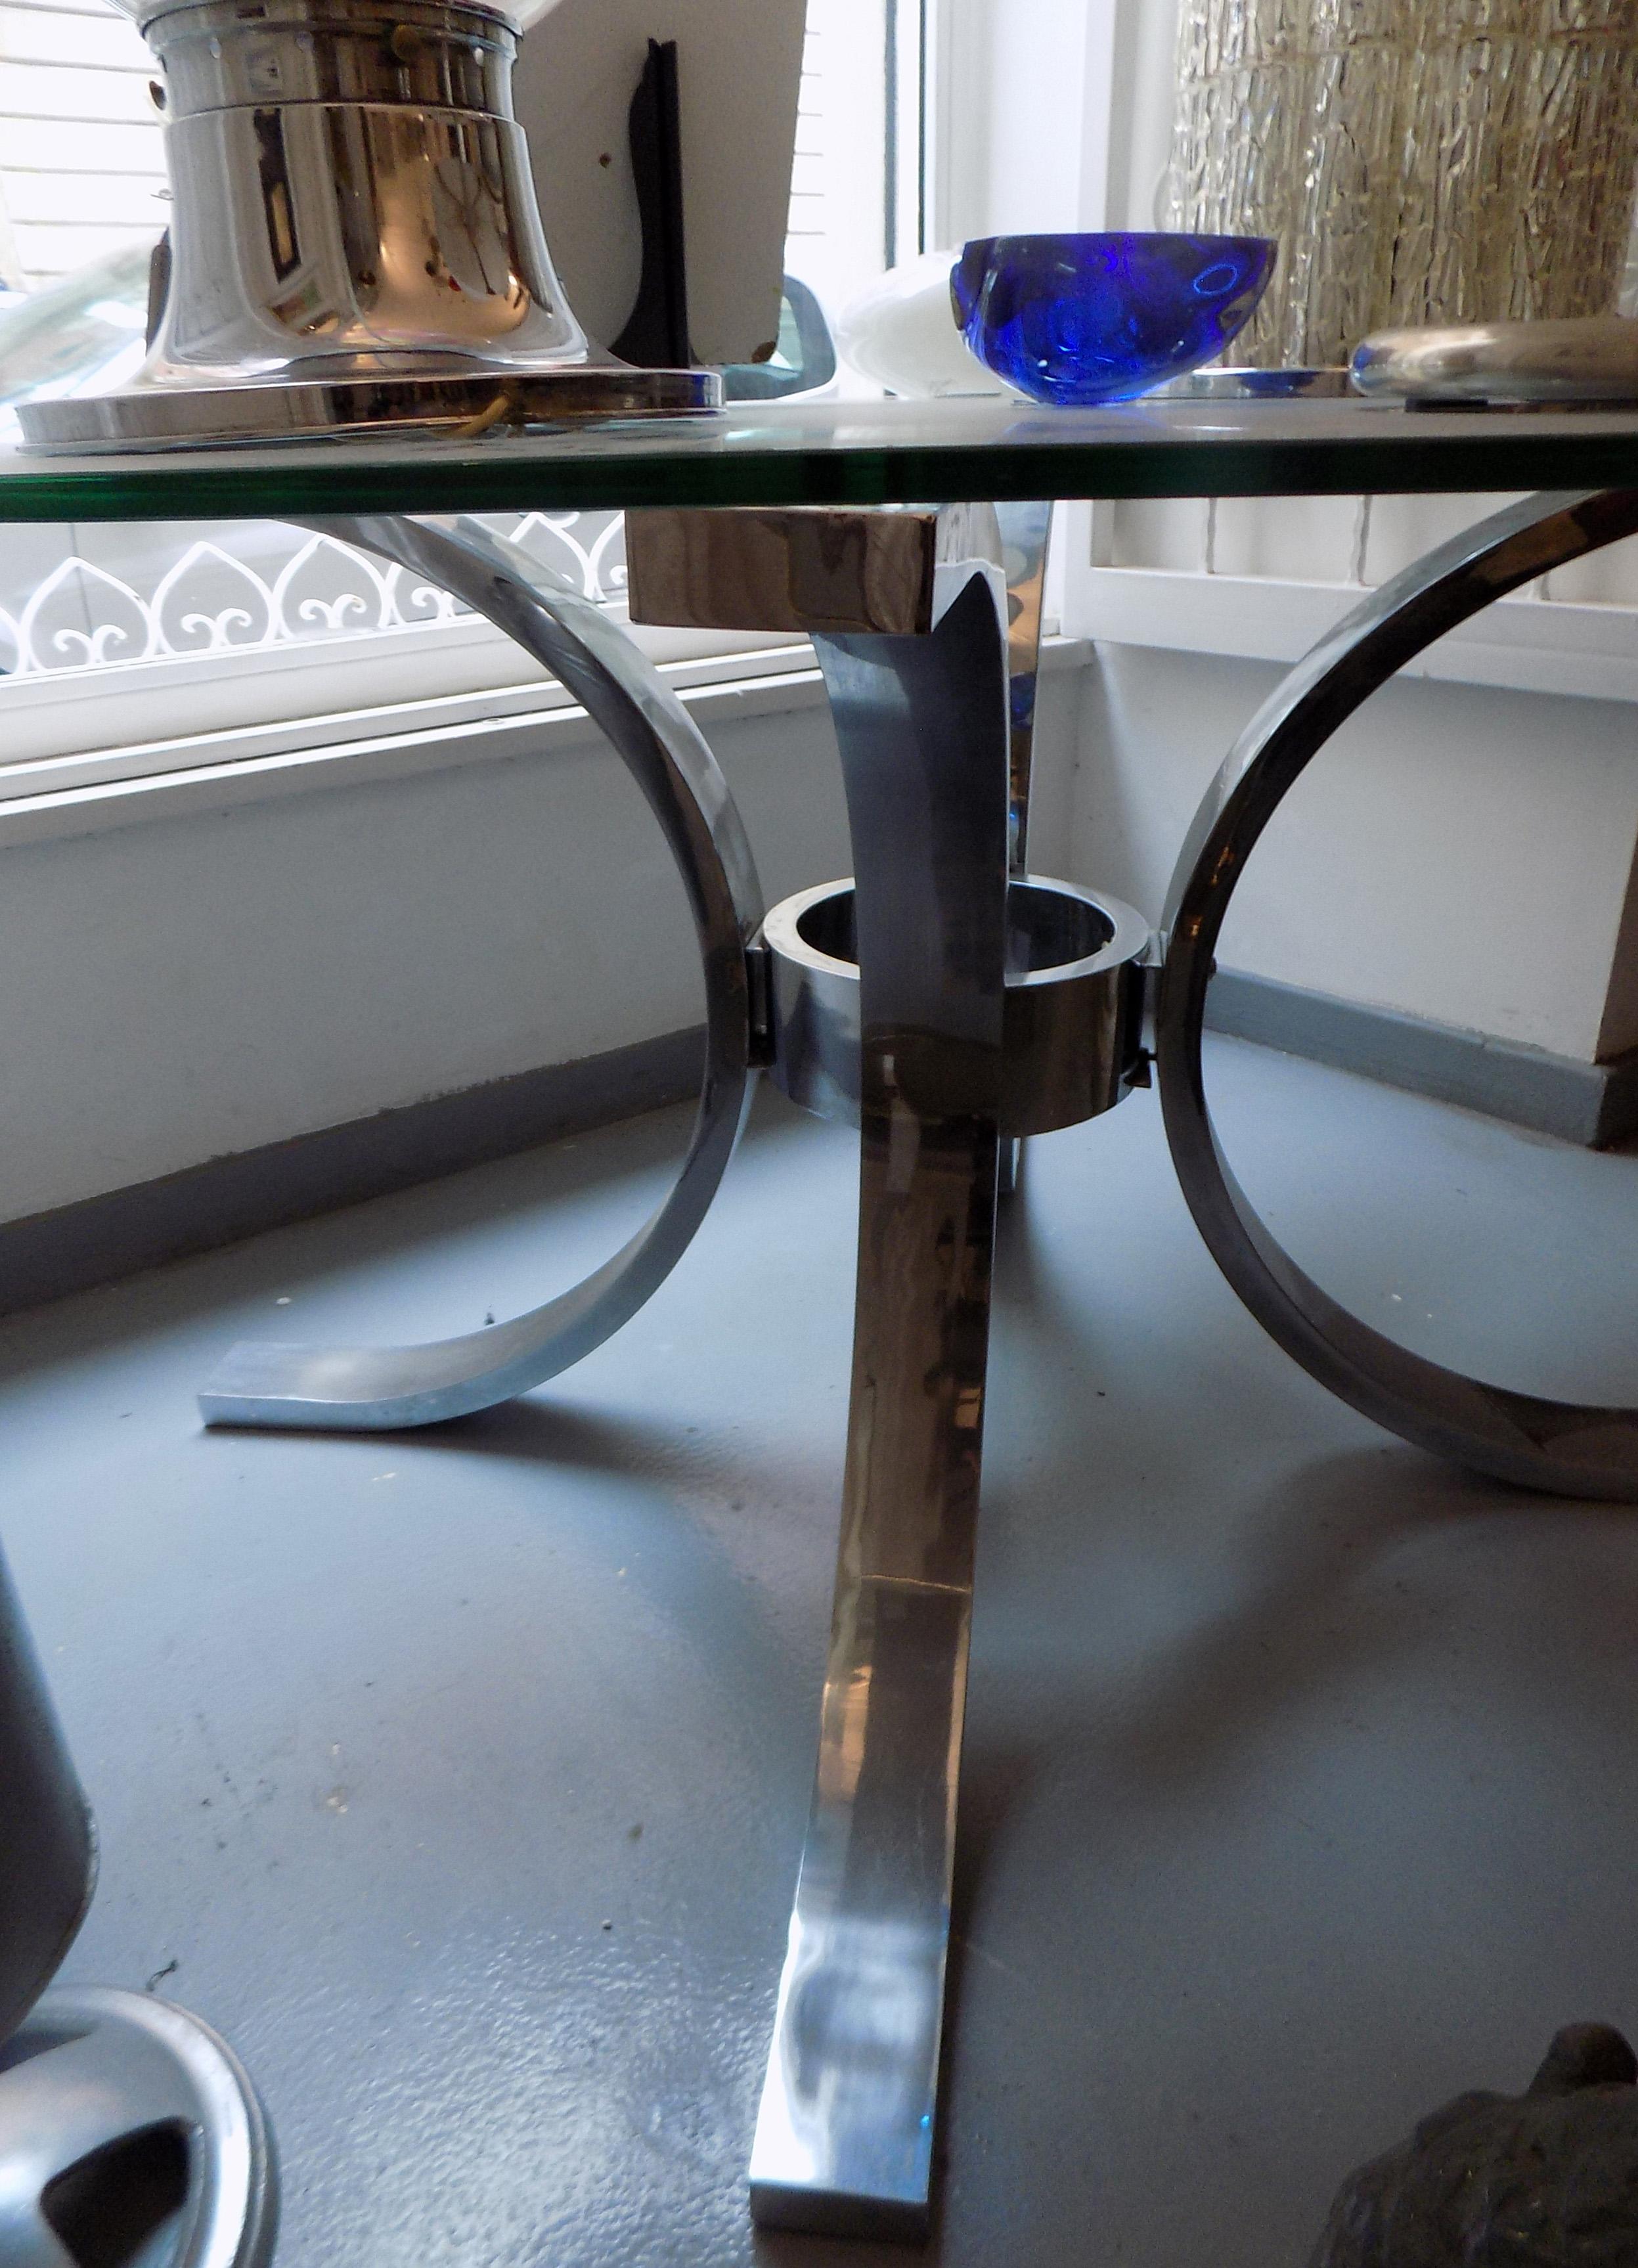 1970s table with glass top, and metal leg structure. The glass top is circular in shape, while the leg is made up of three arch-shaped elements, in the manner of Osvaldo Borsani.